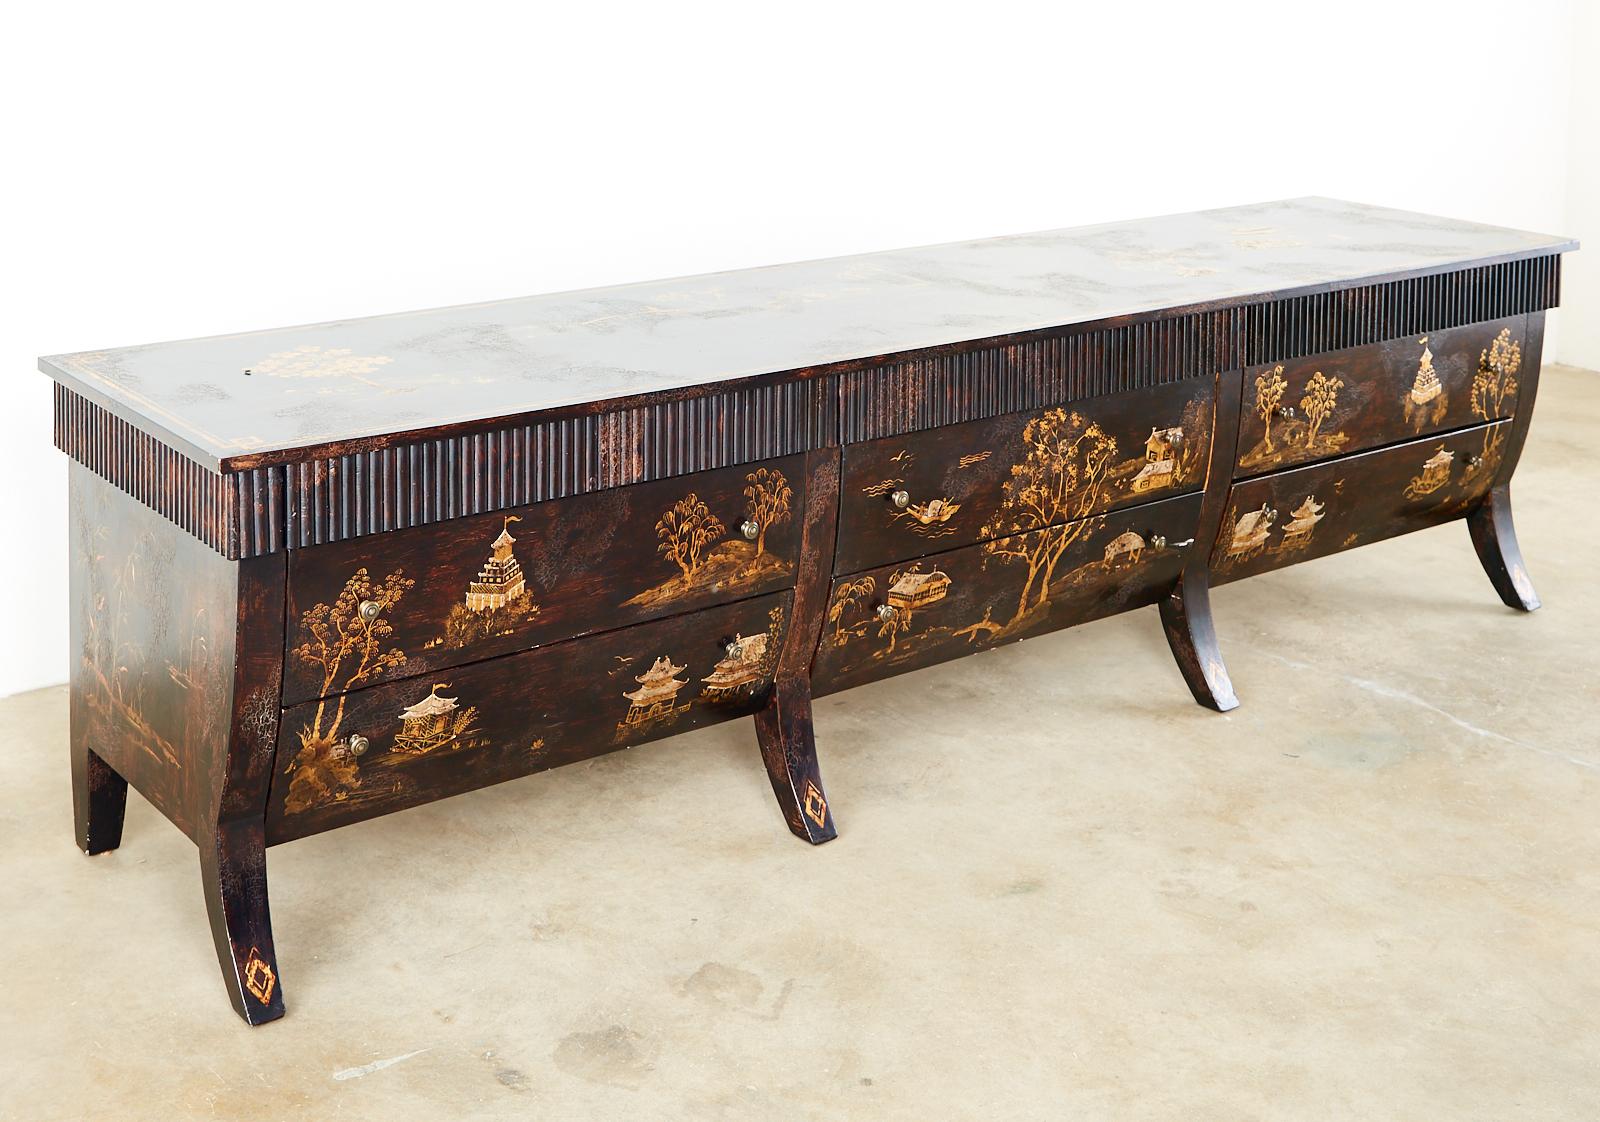 Chinoiserie Monumental Rose Tarlow Japanned Dresser or Chests of Drawers